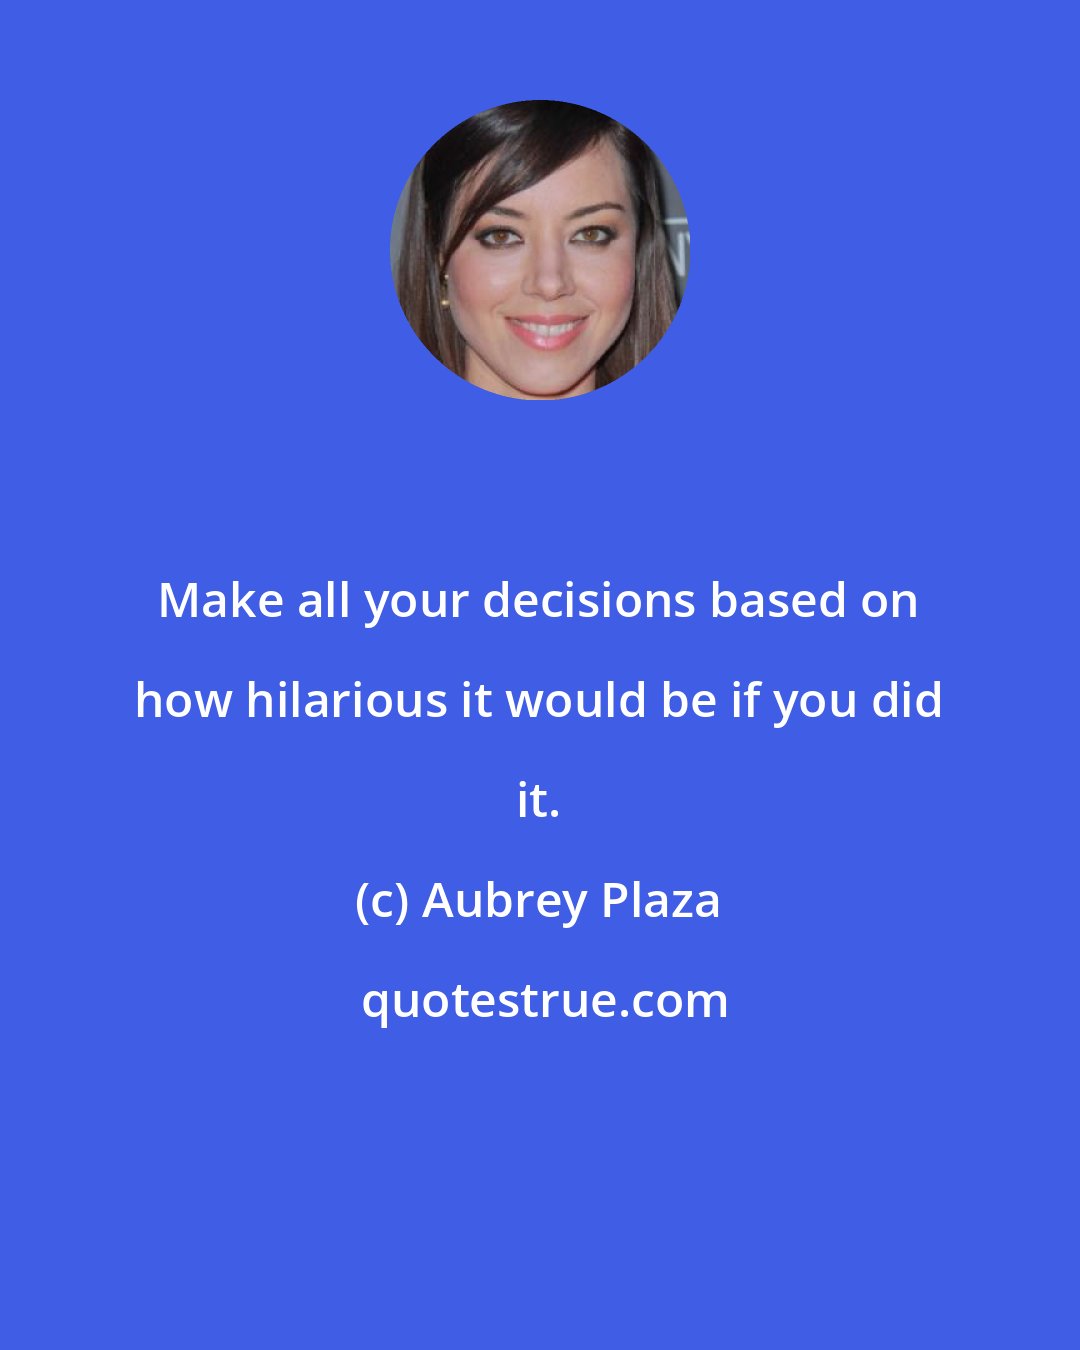 Aubrey Plaza: Make all your decisions based on how hilarious it would be if you did it.